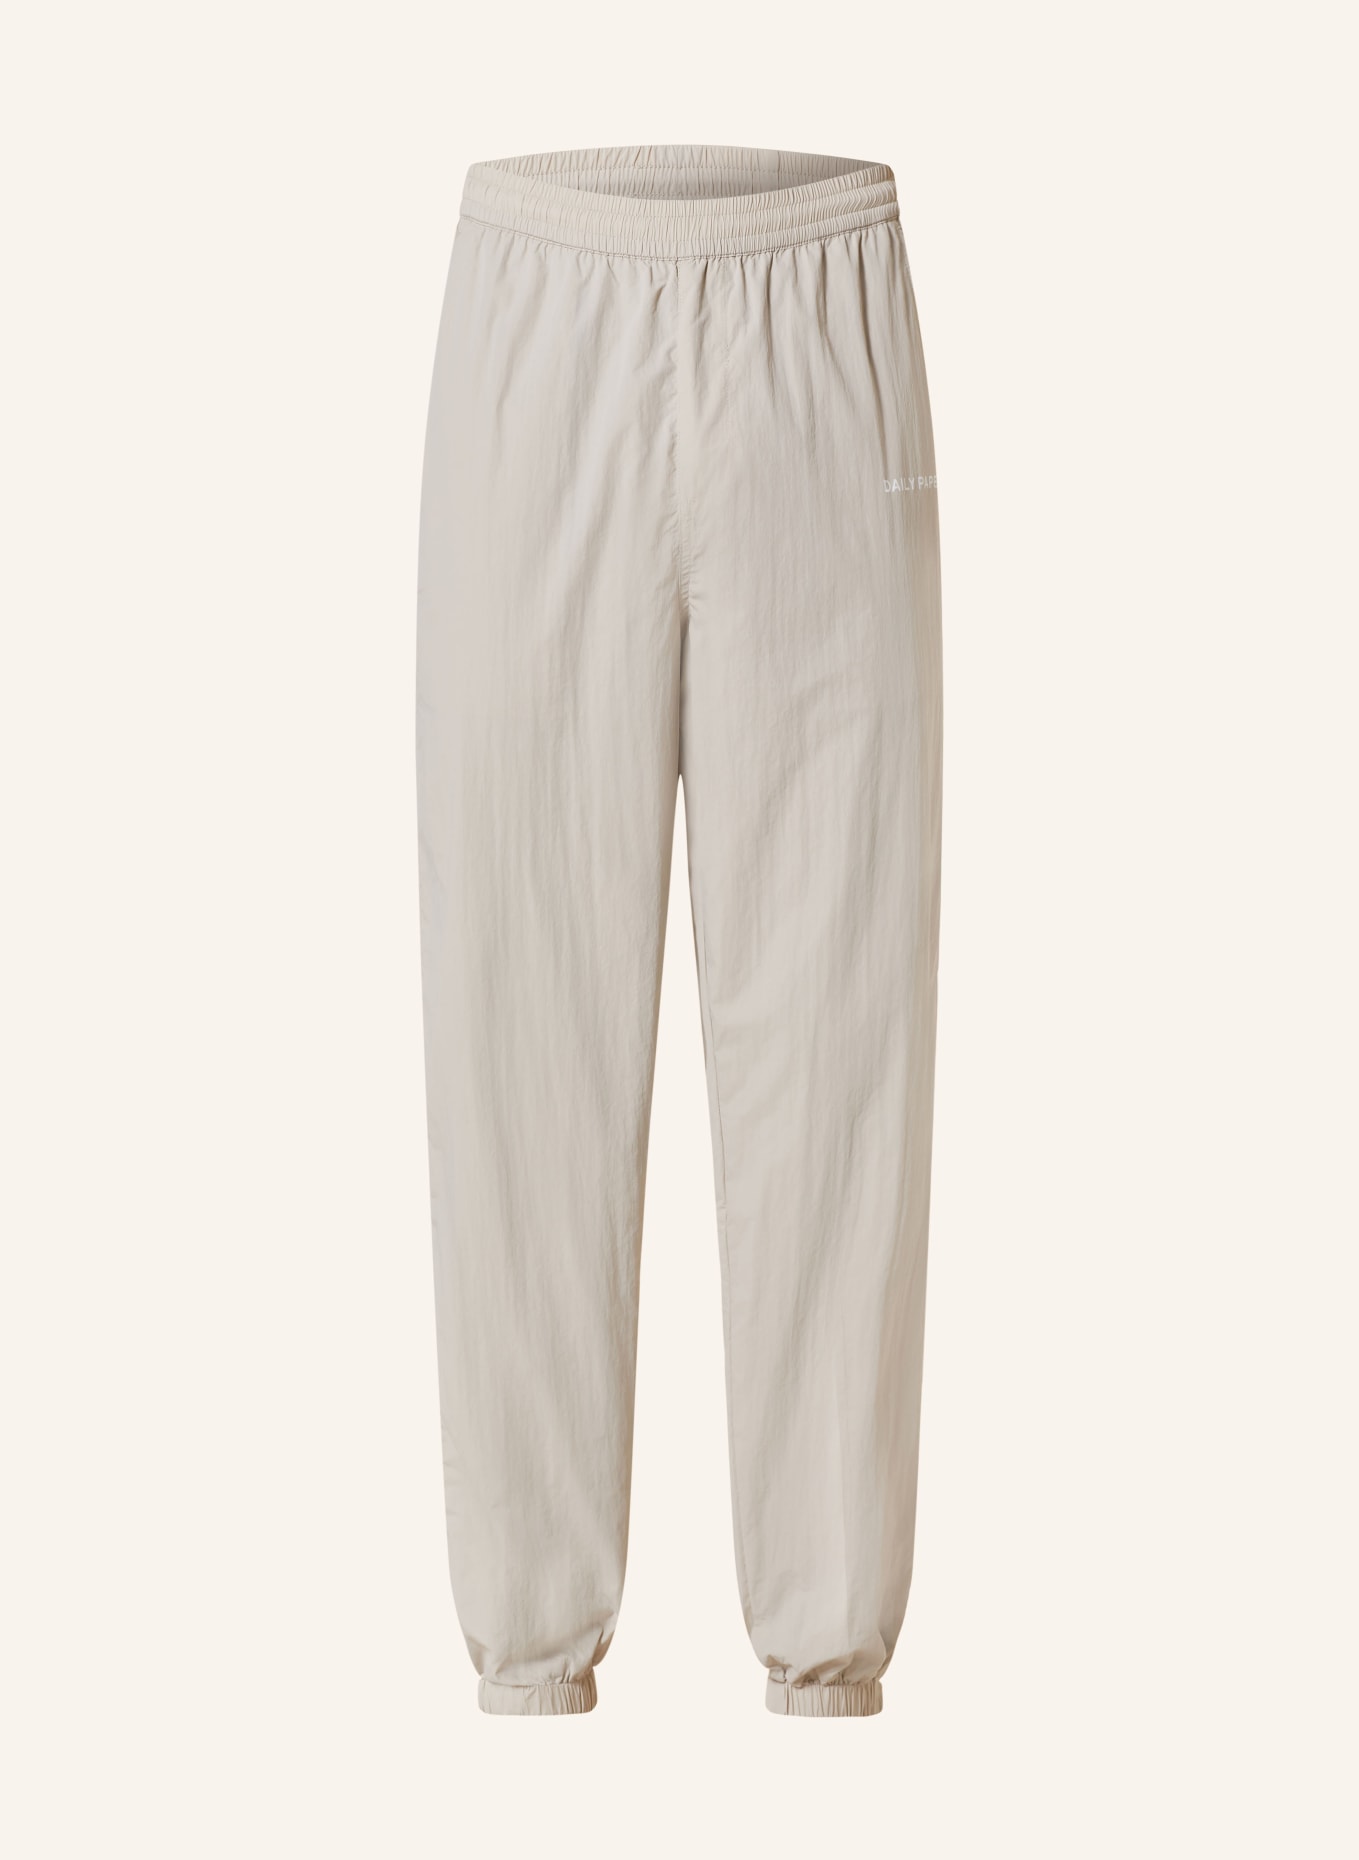 DAILY PAPER Pants EWARD in jogger style, Color: BEIGE (Image 1)